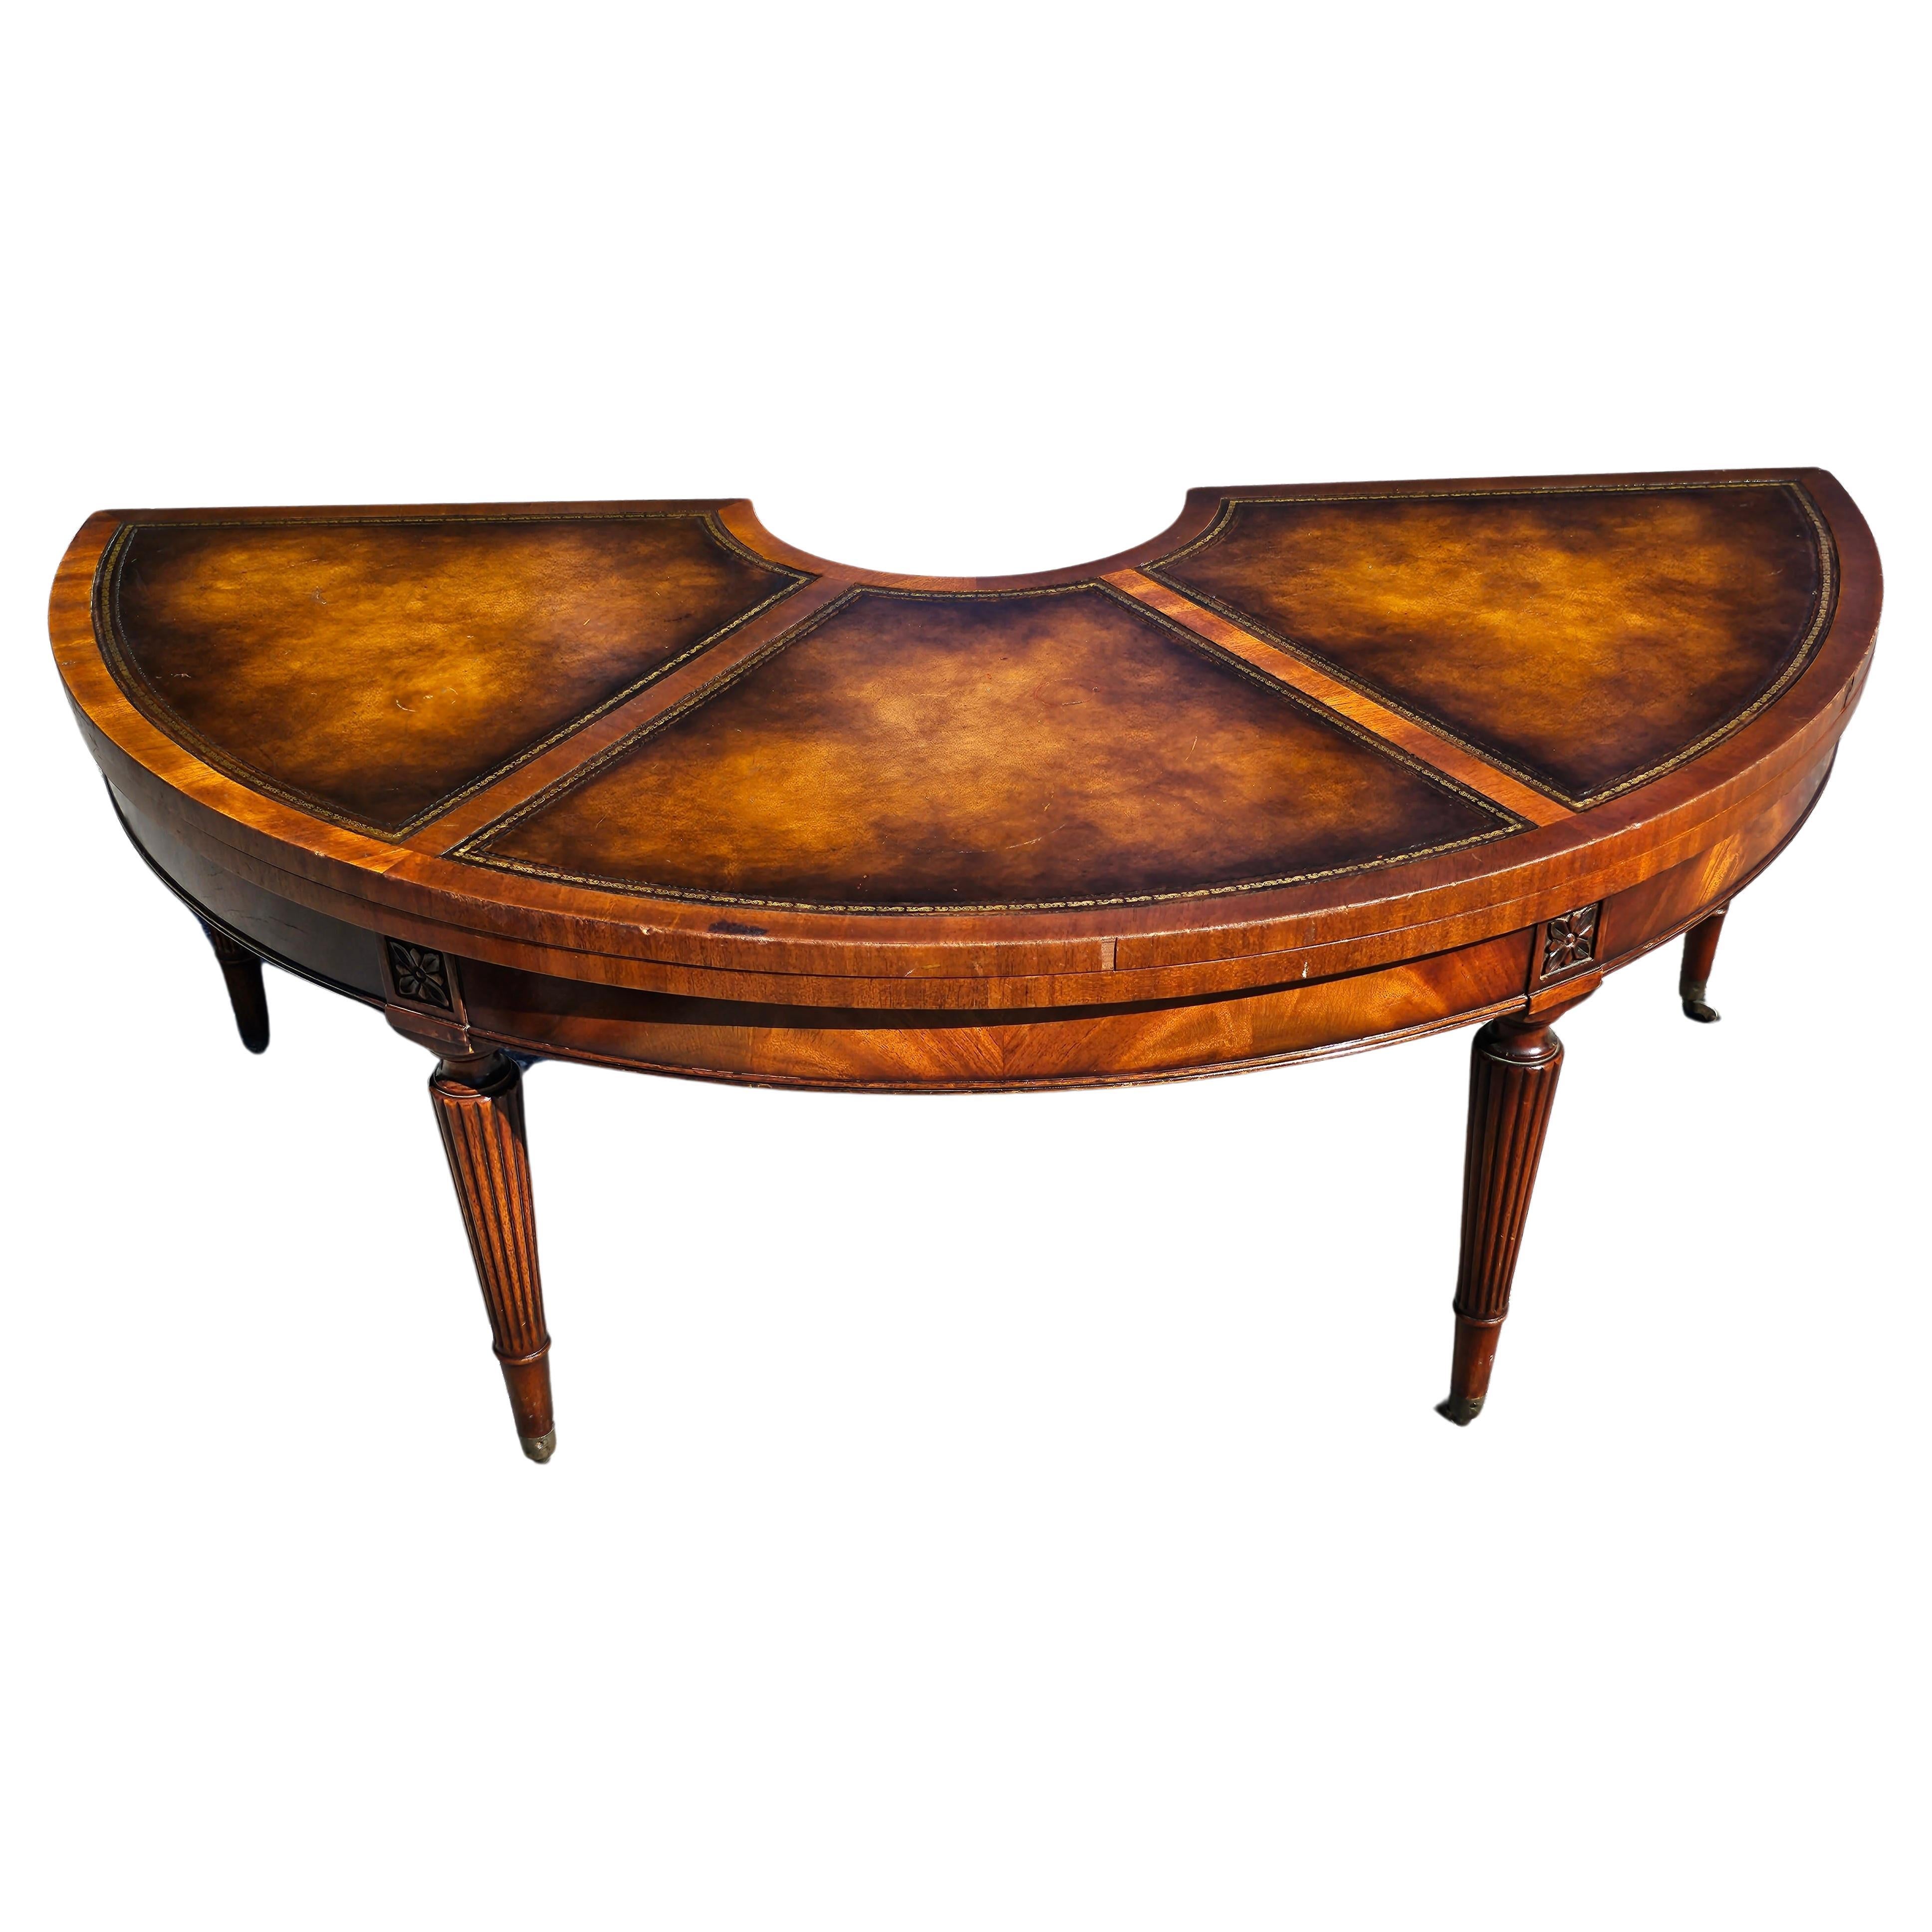 1940s Weiman Regency Tooled Leather Mahogany Convertible Demilune Cocktail Table In Good Condition For Sale In Germantown, MD